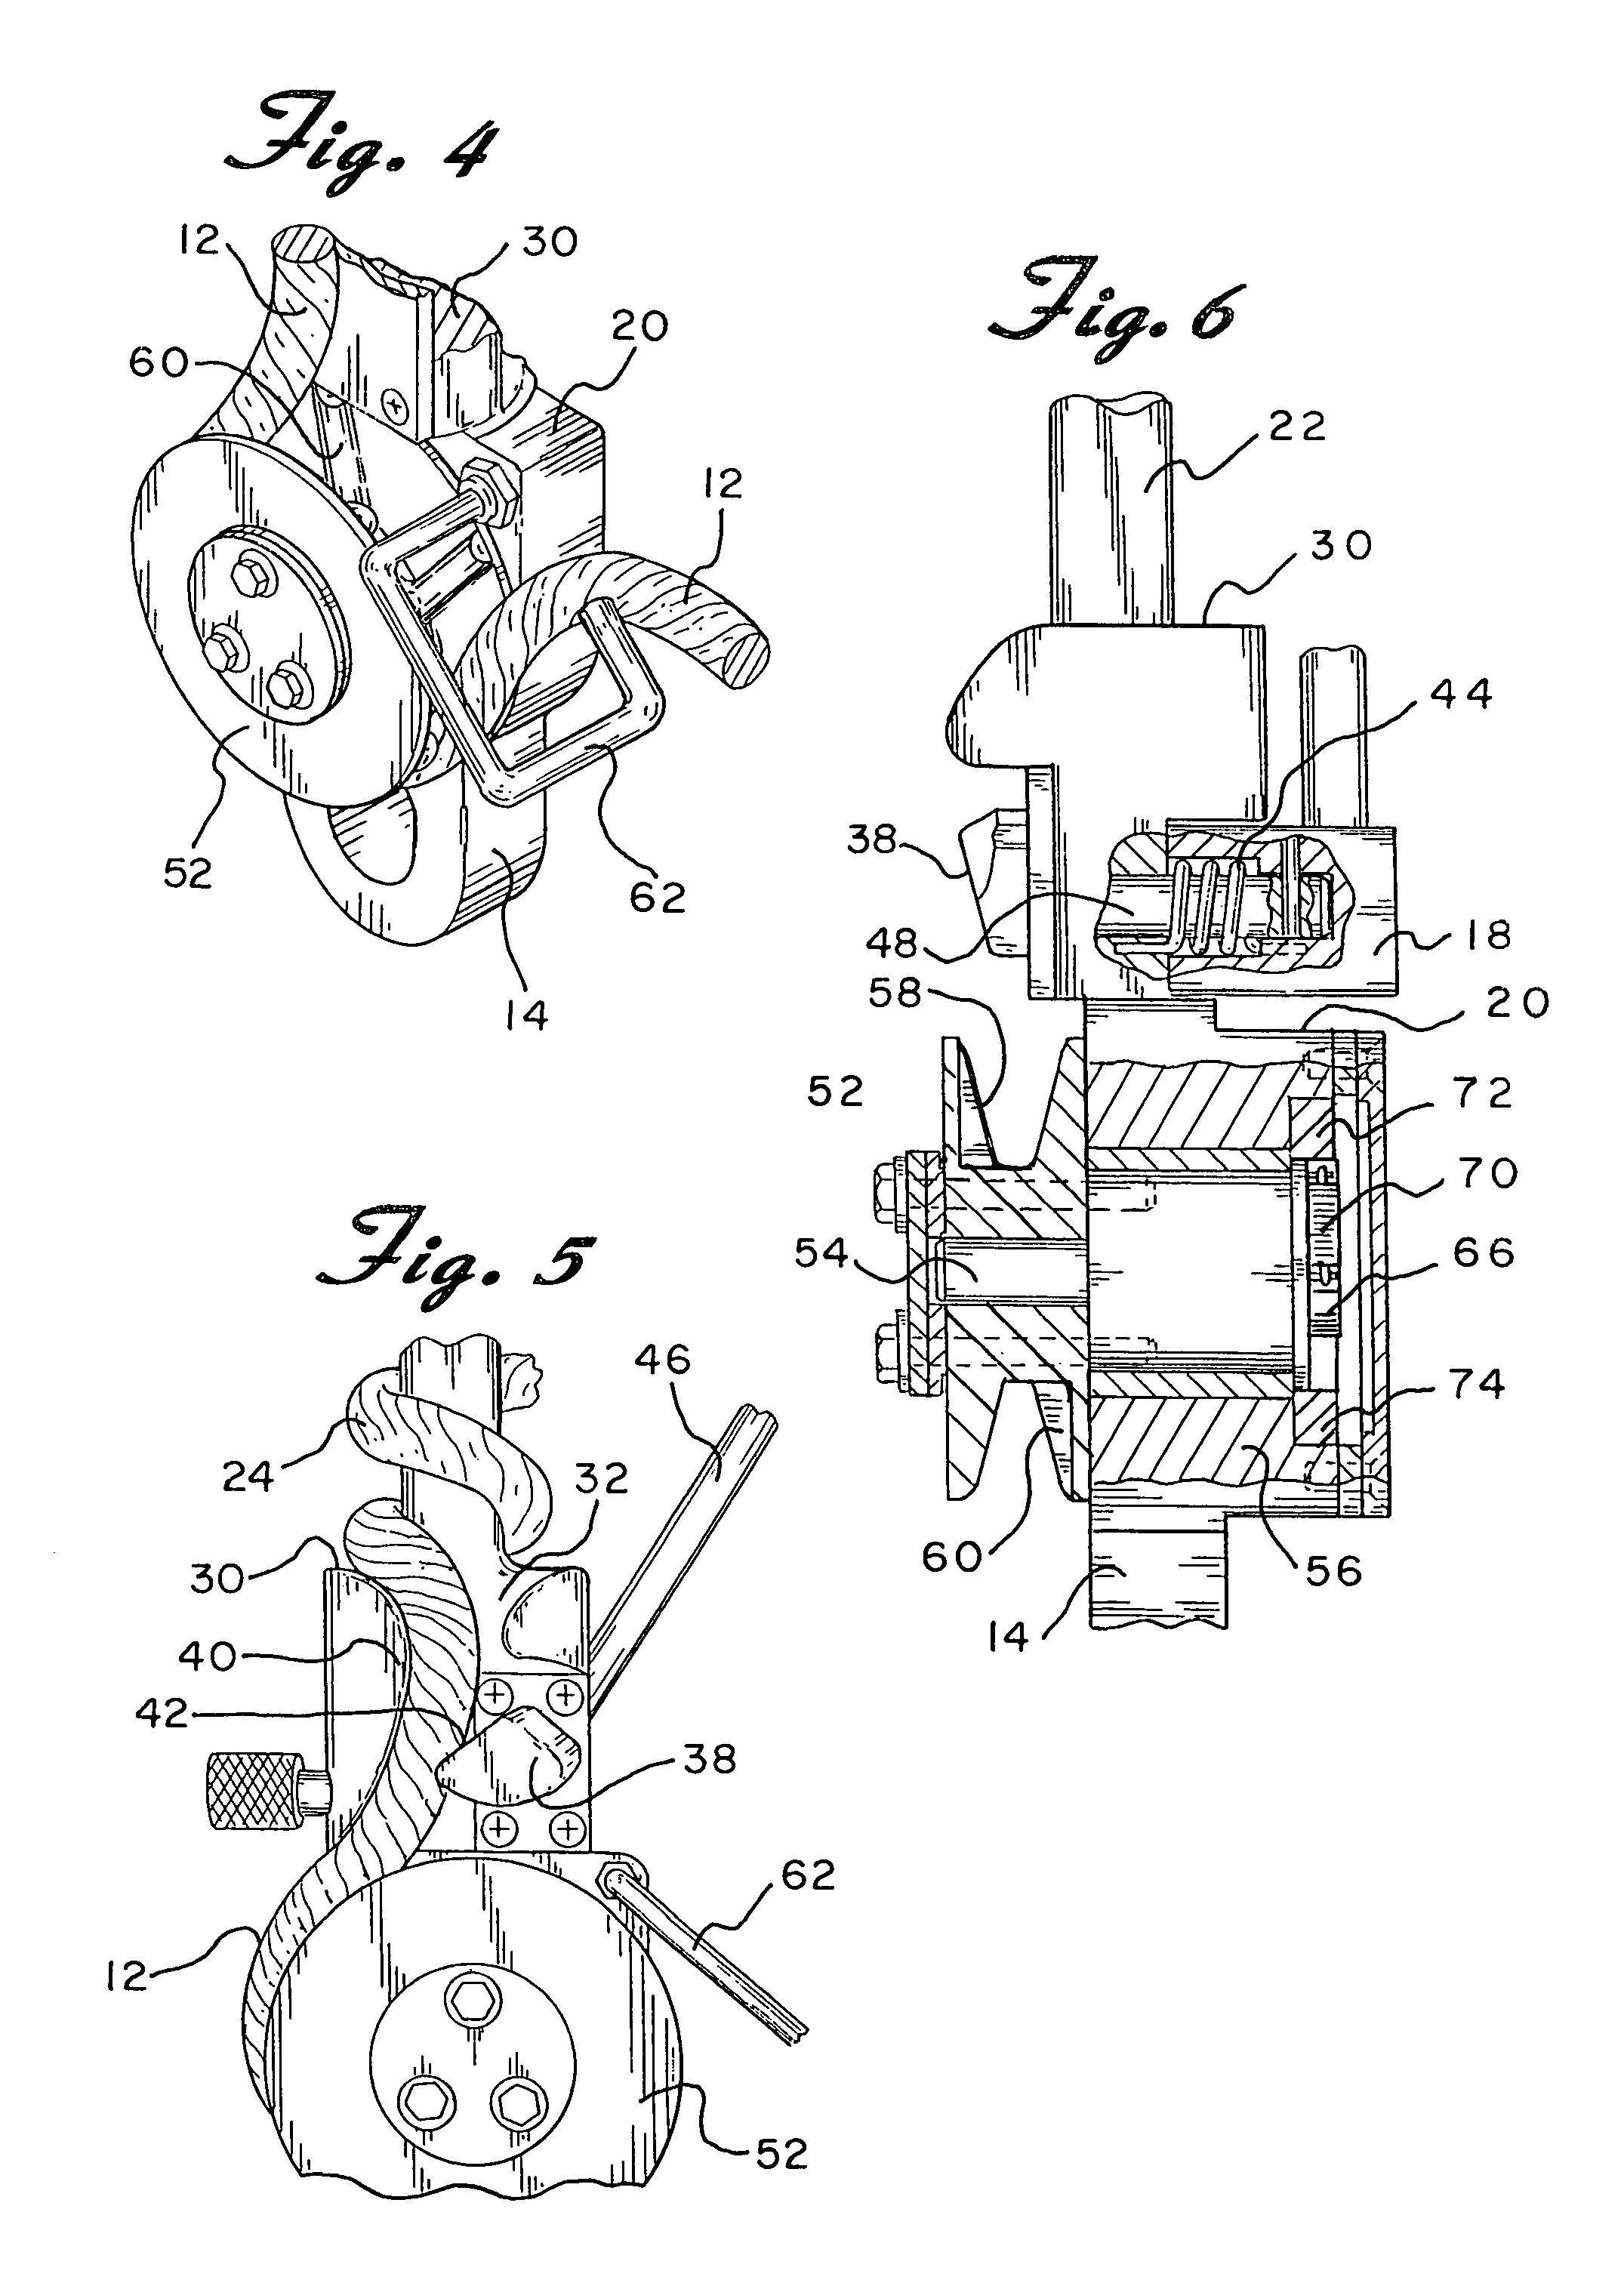 Descent controller with safety brake